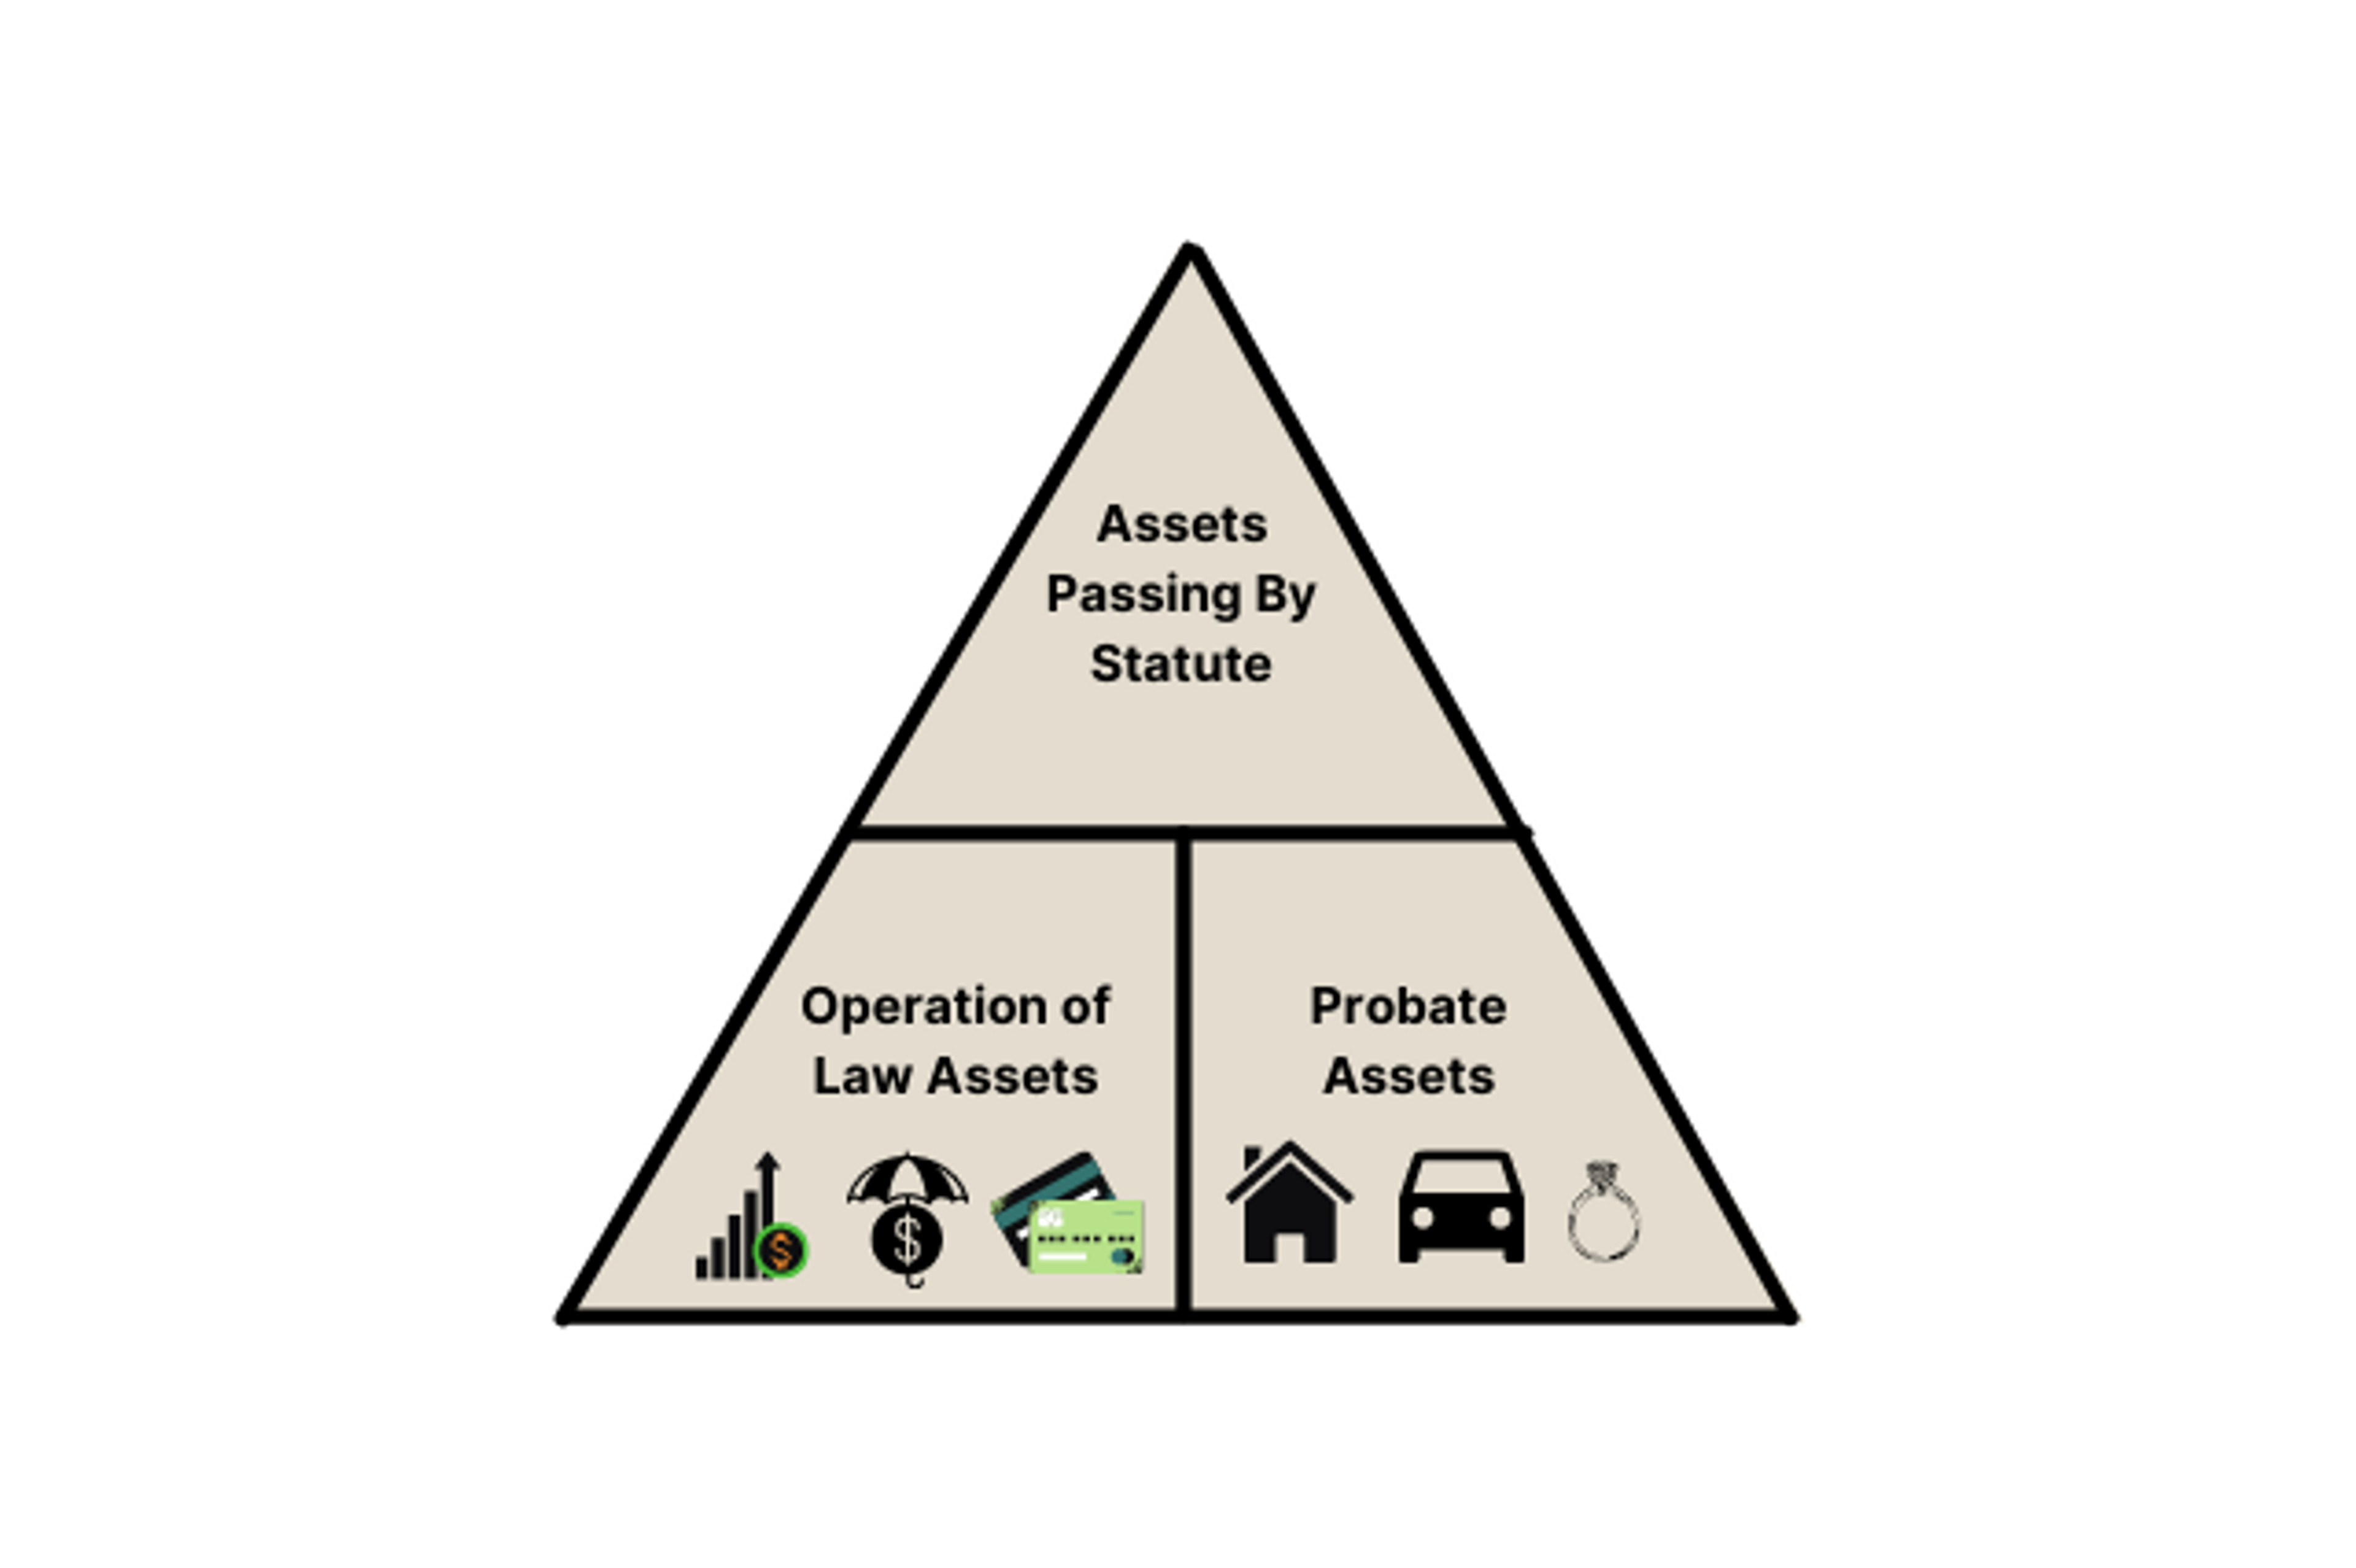 pyramid with a couple examples of operation of law assets, probate assets, and assets passing by statute